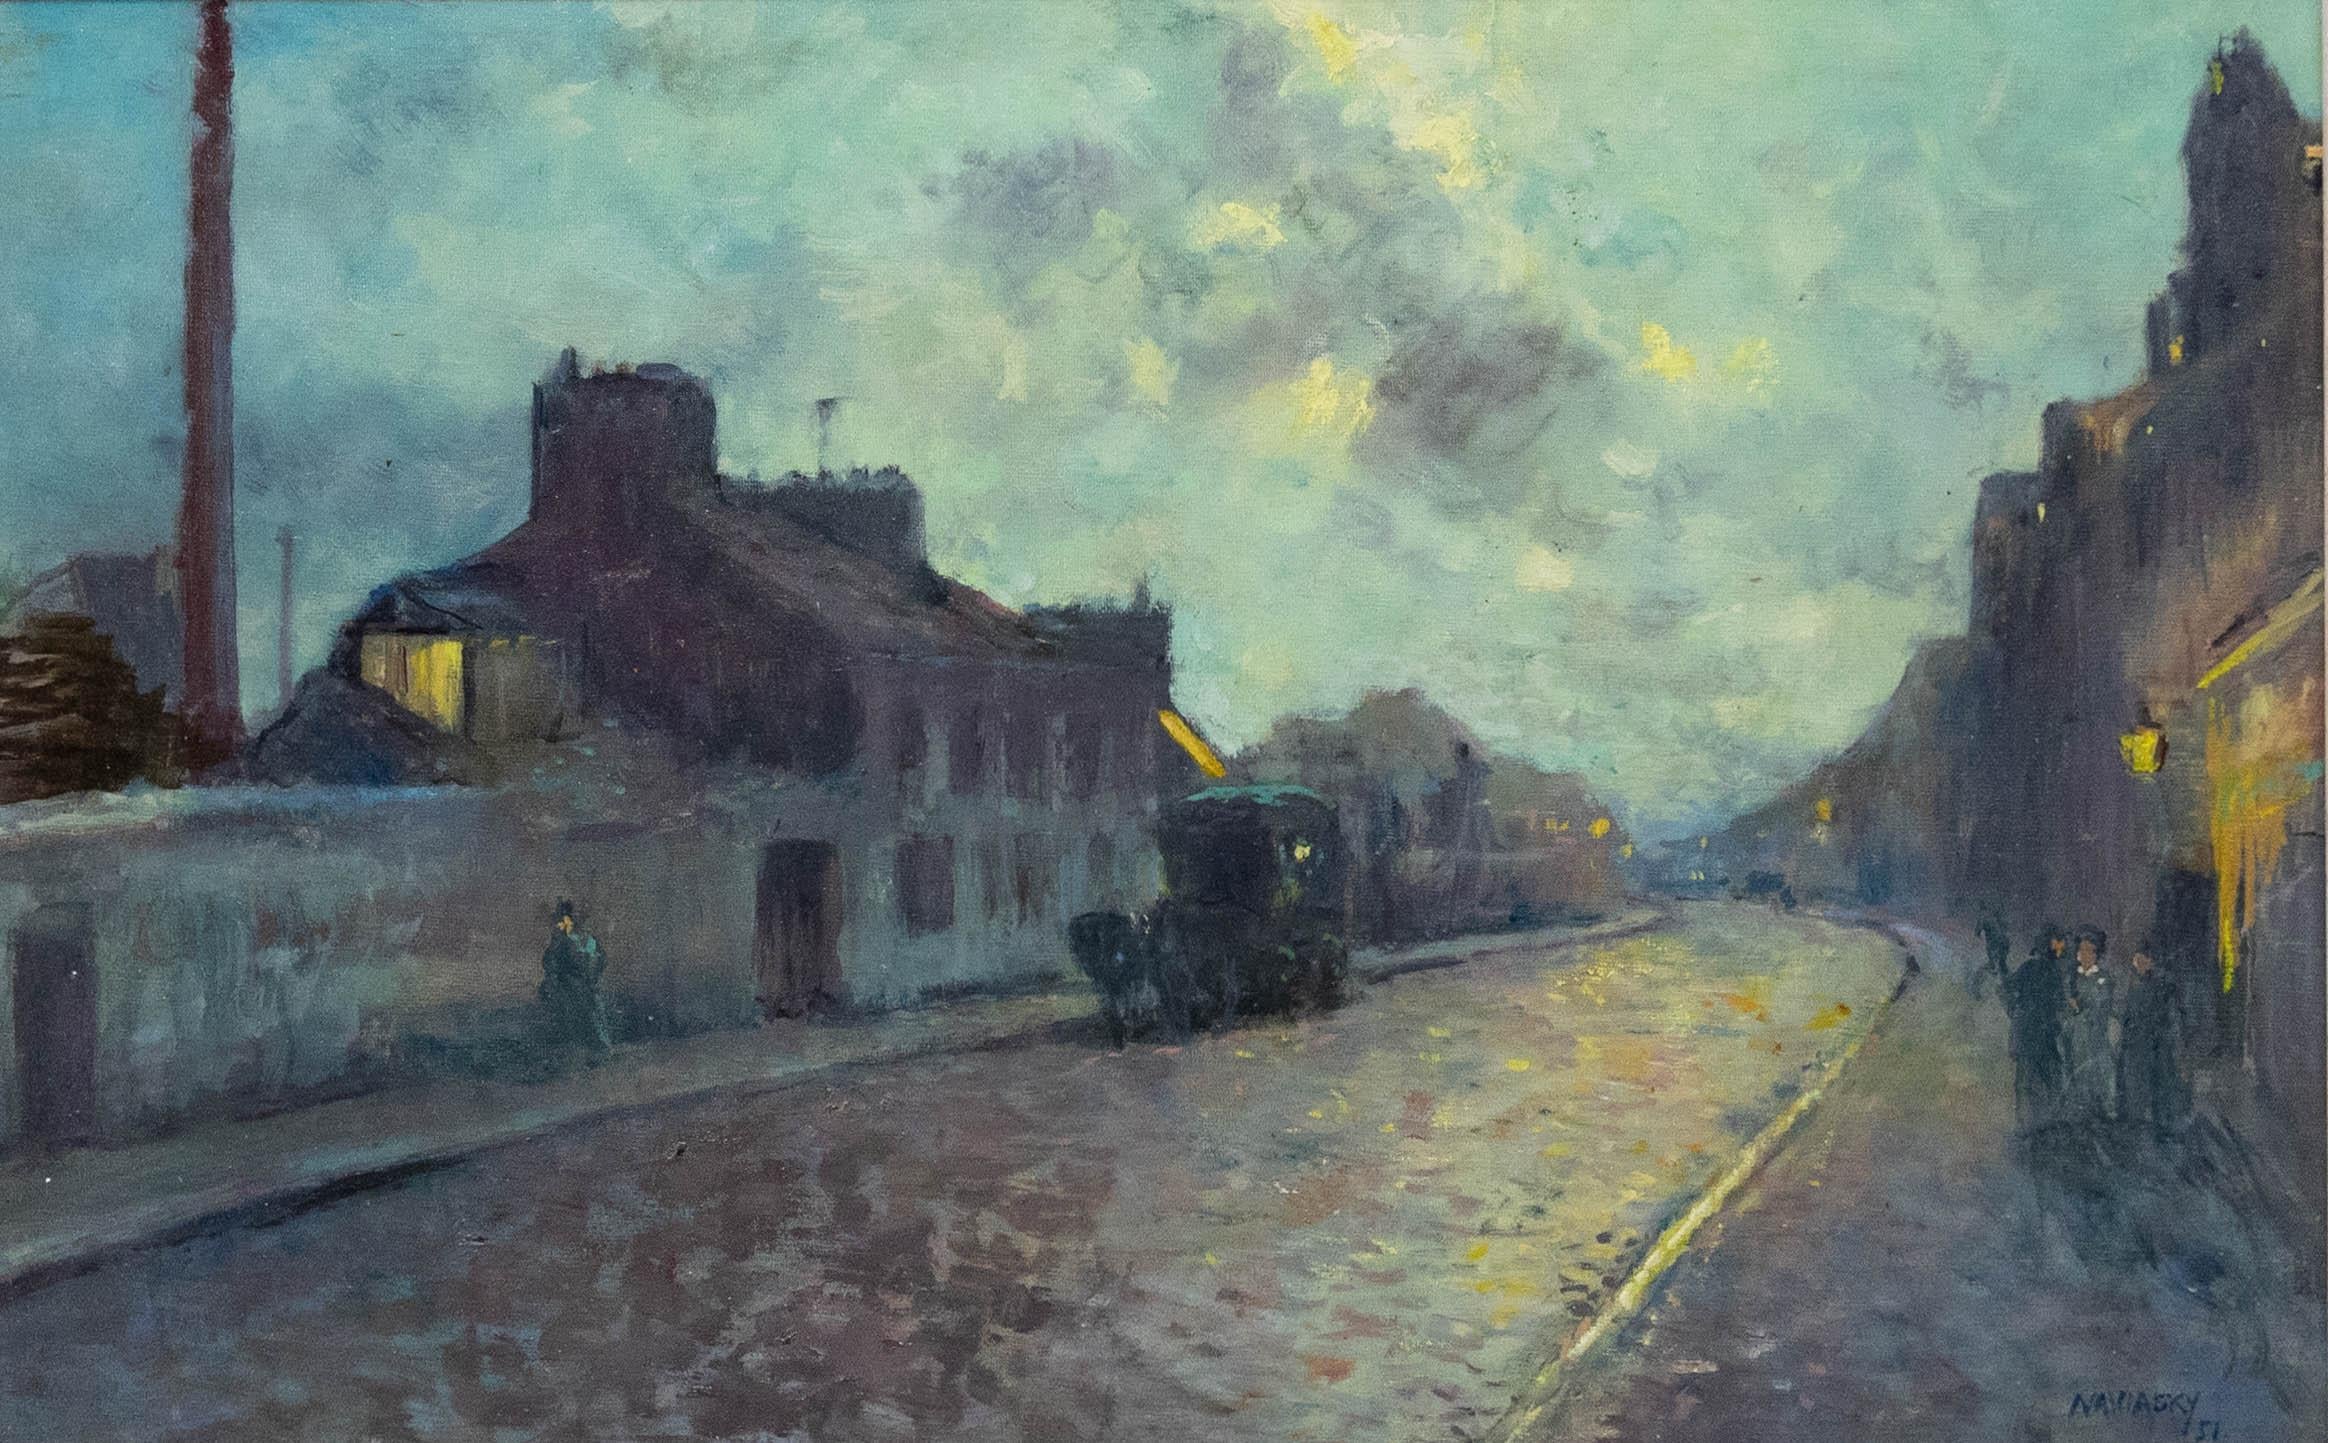 Manner of Philip Naviasky (1894-1983) - 20th Century Oil, Street Scene at Dusk - Painting by Unknown